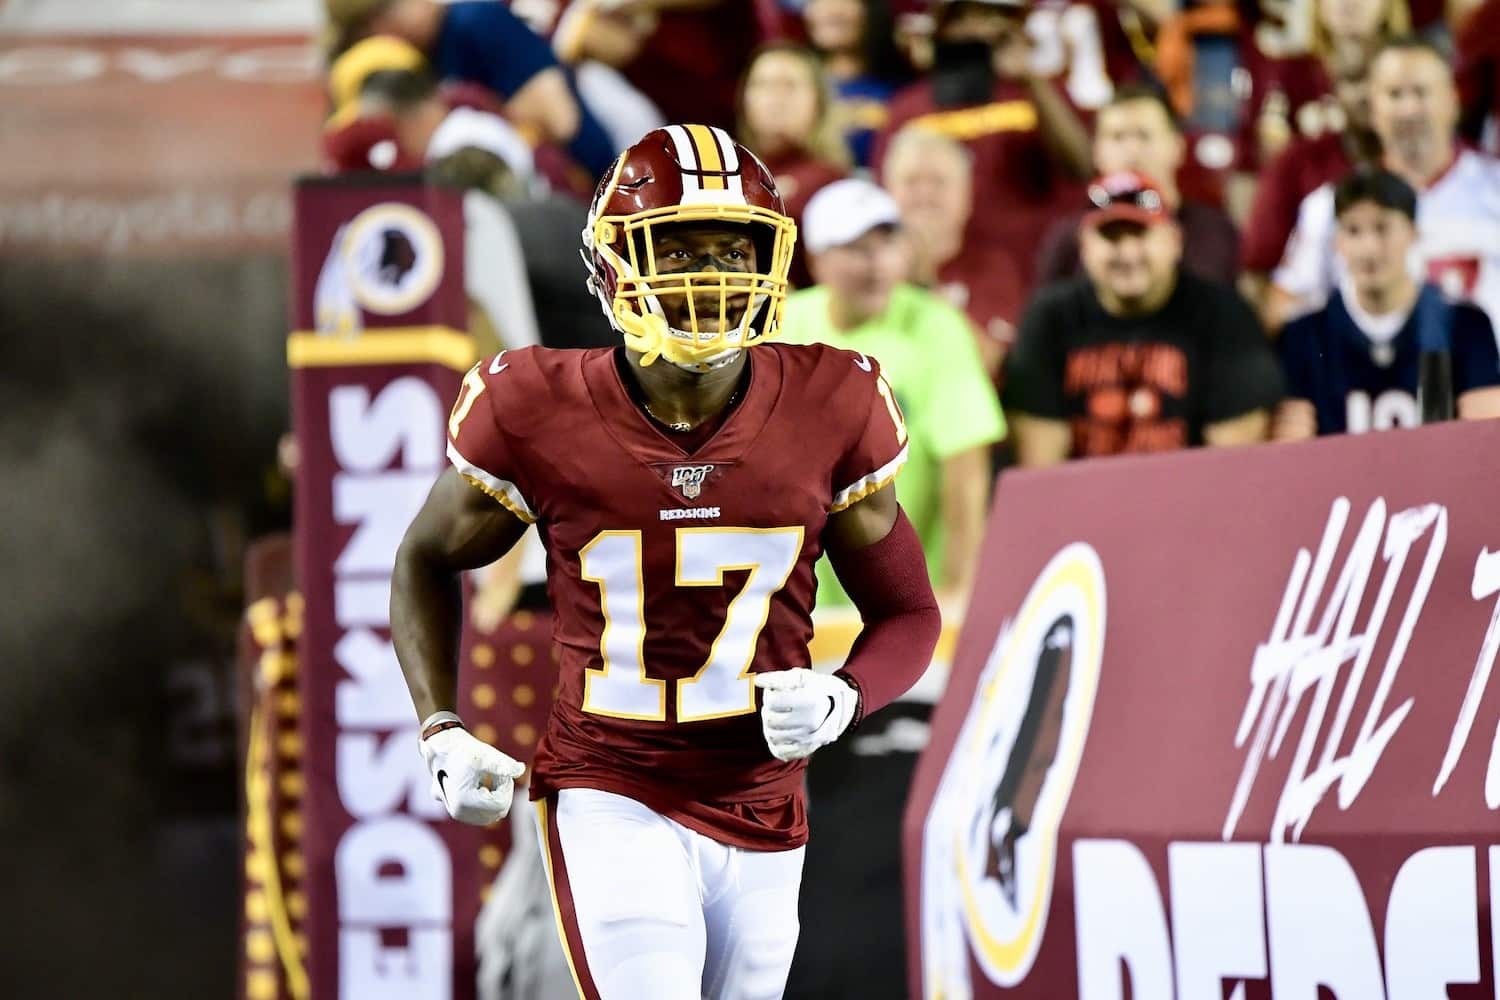 Washington Redskins Wide Receiver Terry McLaurin. Photo Credit: All Pro Reels | Joe Glorioso | Under Creative Commons License